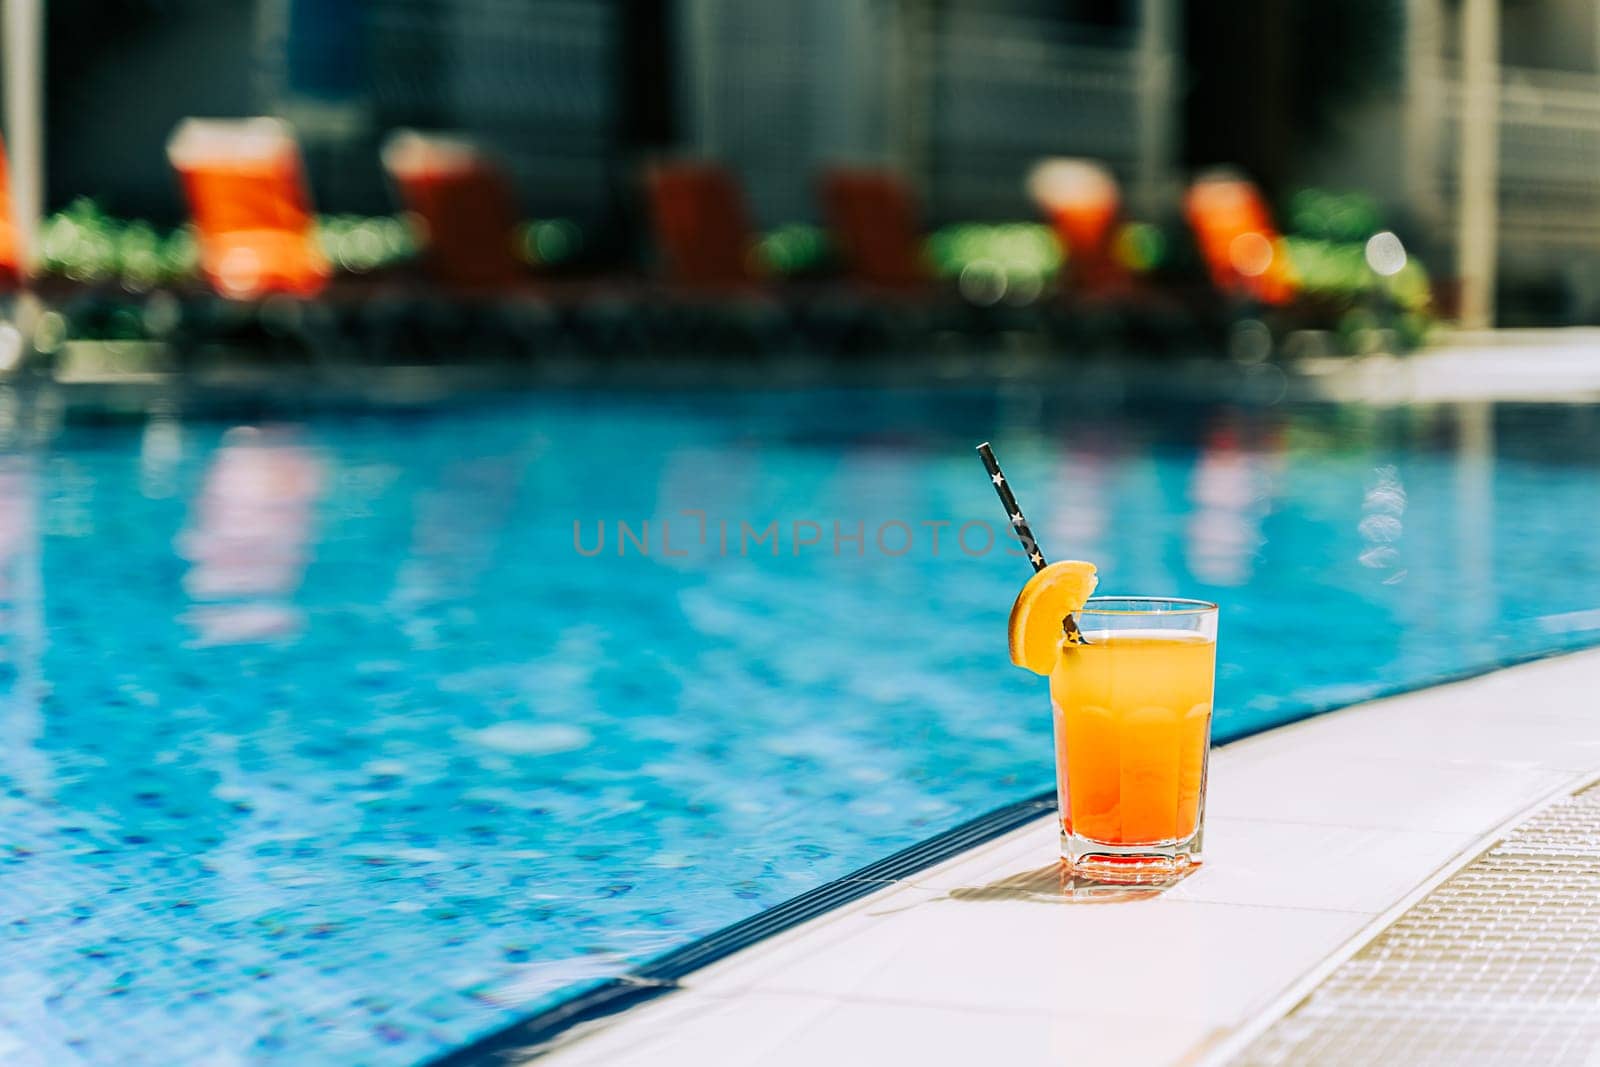 Tropical sparkling cocktail by the pool. The shot of glass with orange lemonade fruit cocktail standing near the poolside. Summer alcohol free drink by the hotel pool. Hello summer holiday vacation by Ostanina